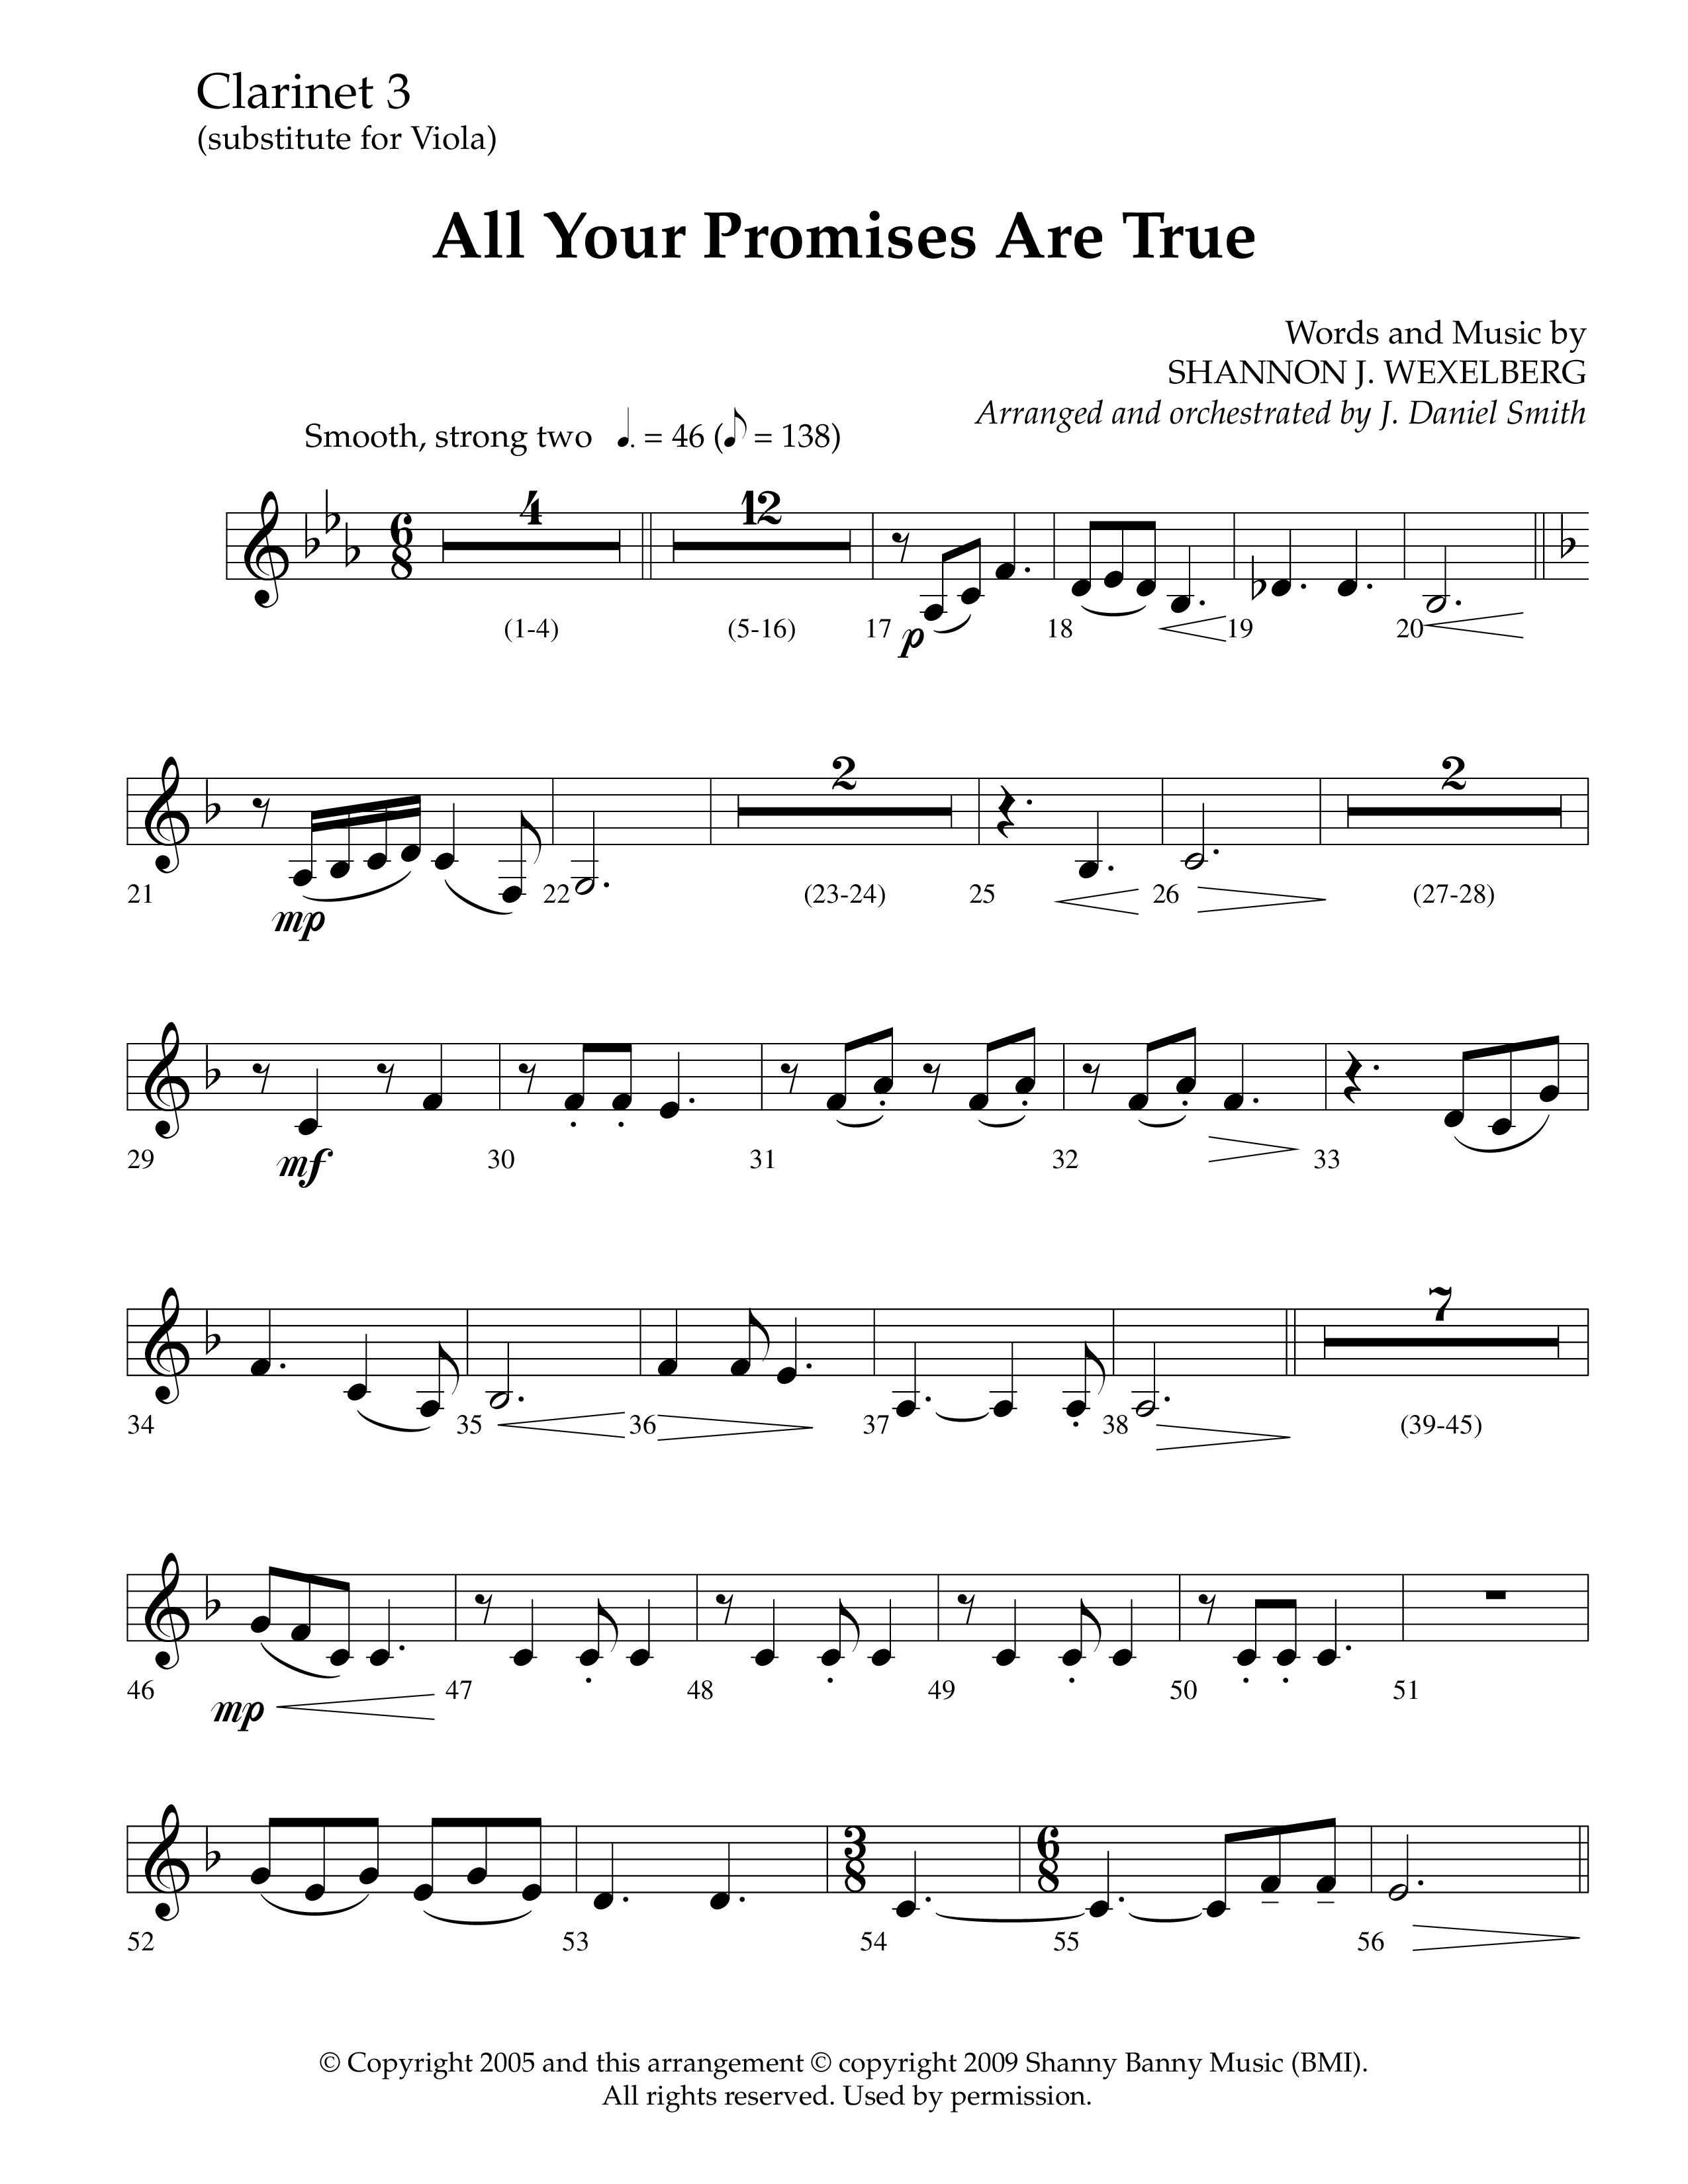 All Your Promises Are True (Choral Anthem SATB) Clarinet 3 (Lifeway Choral / Arr. J. Daniel Smith)